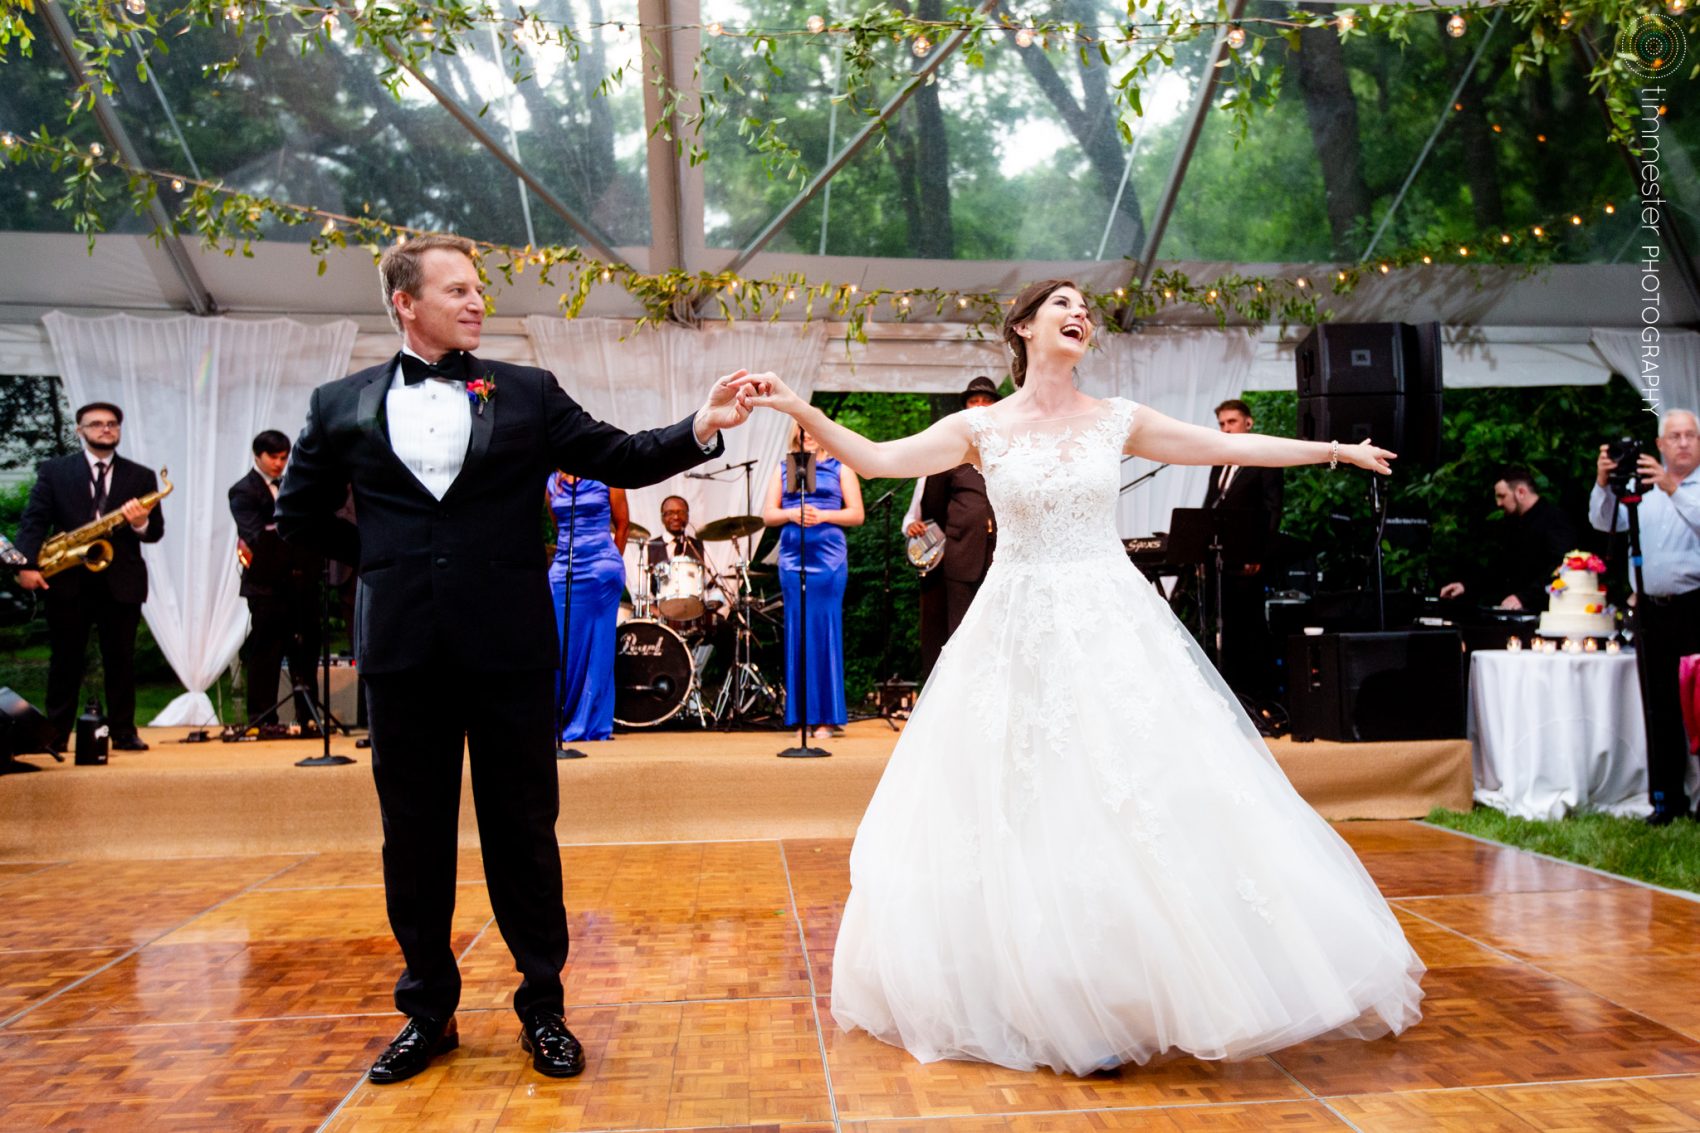 The first dance for the bride and groom at their private residence reception in McLean, Virginia.